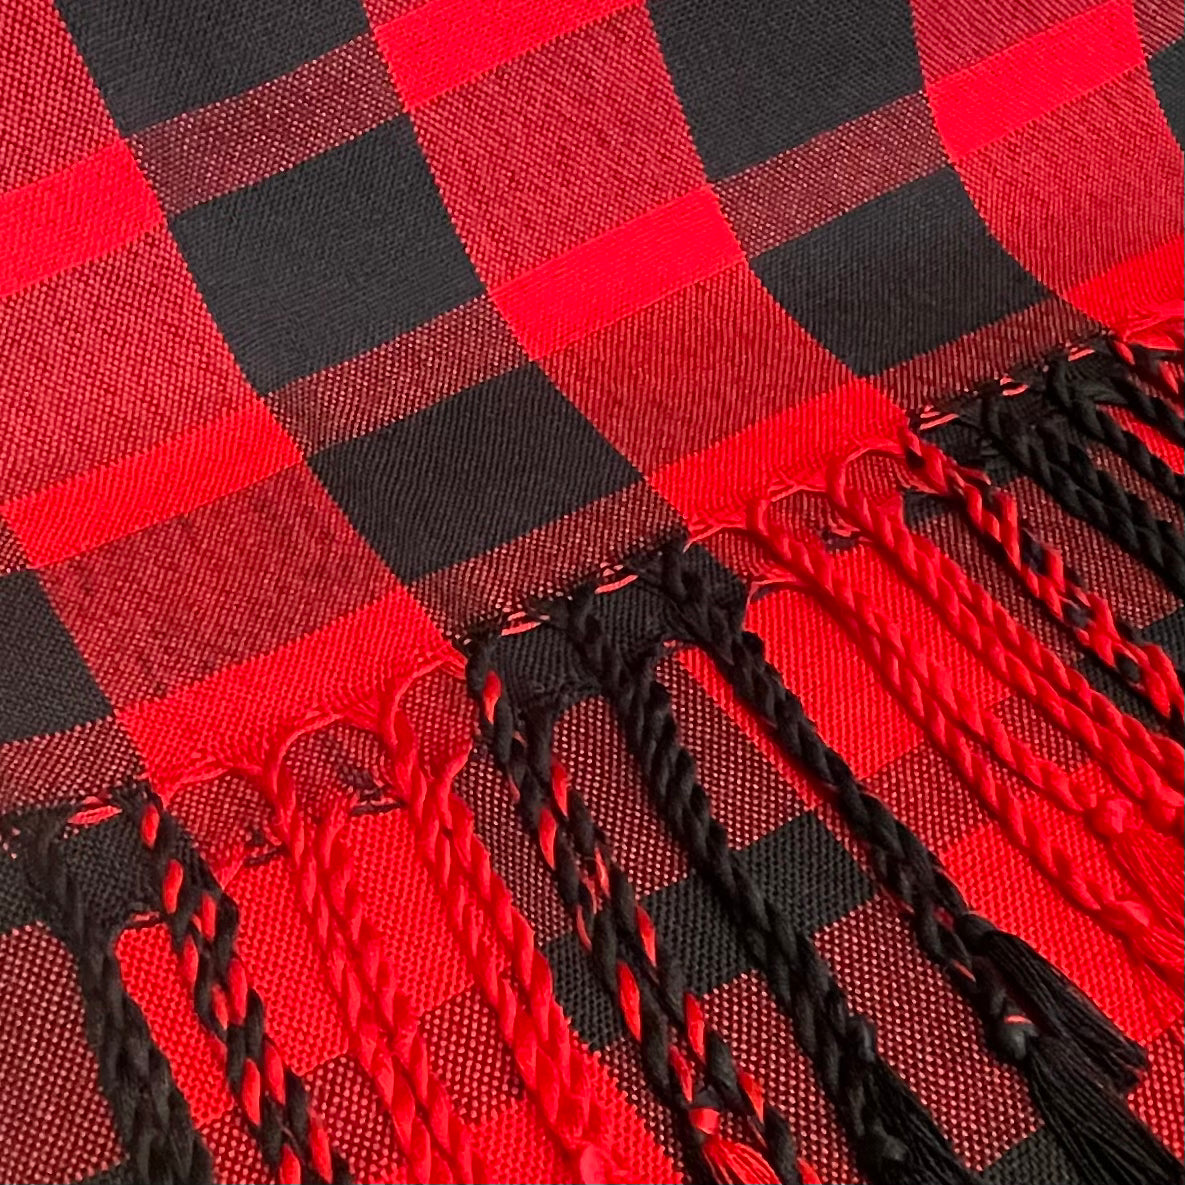 Red and black chequered scarf by Ann Brooks 